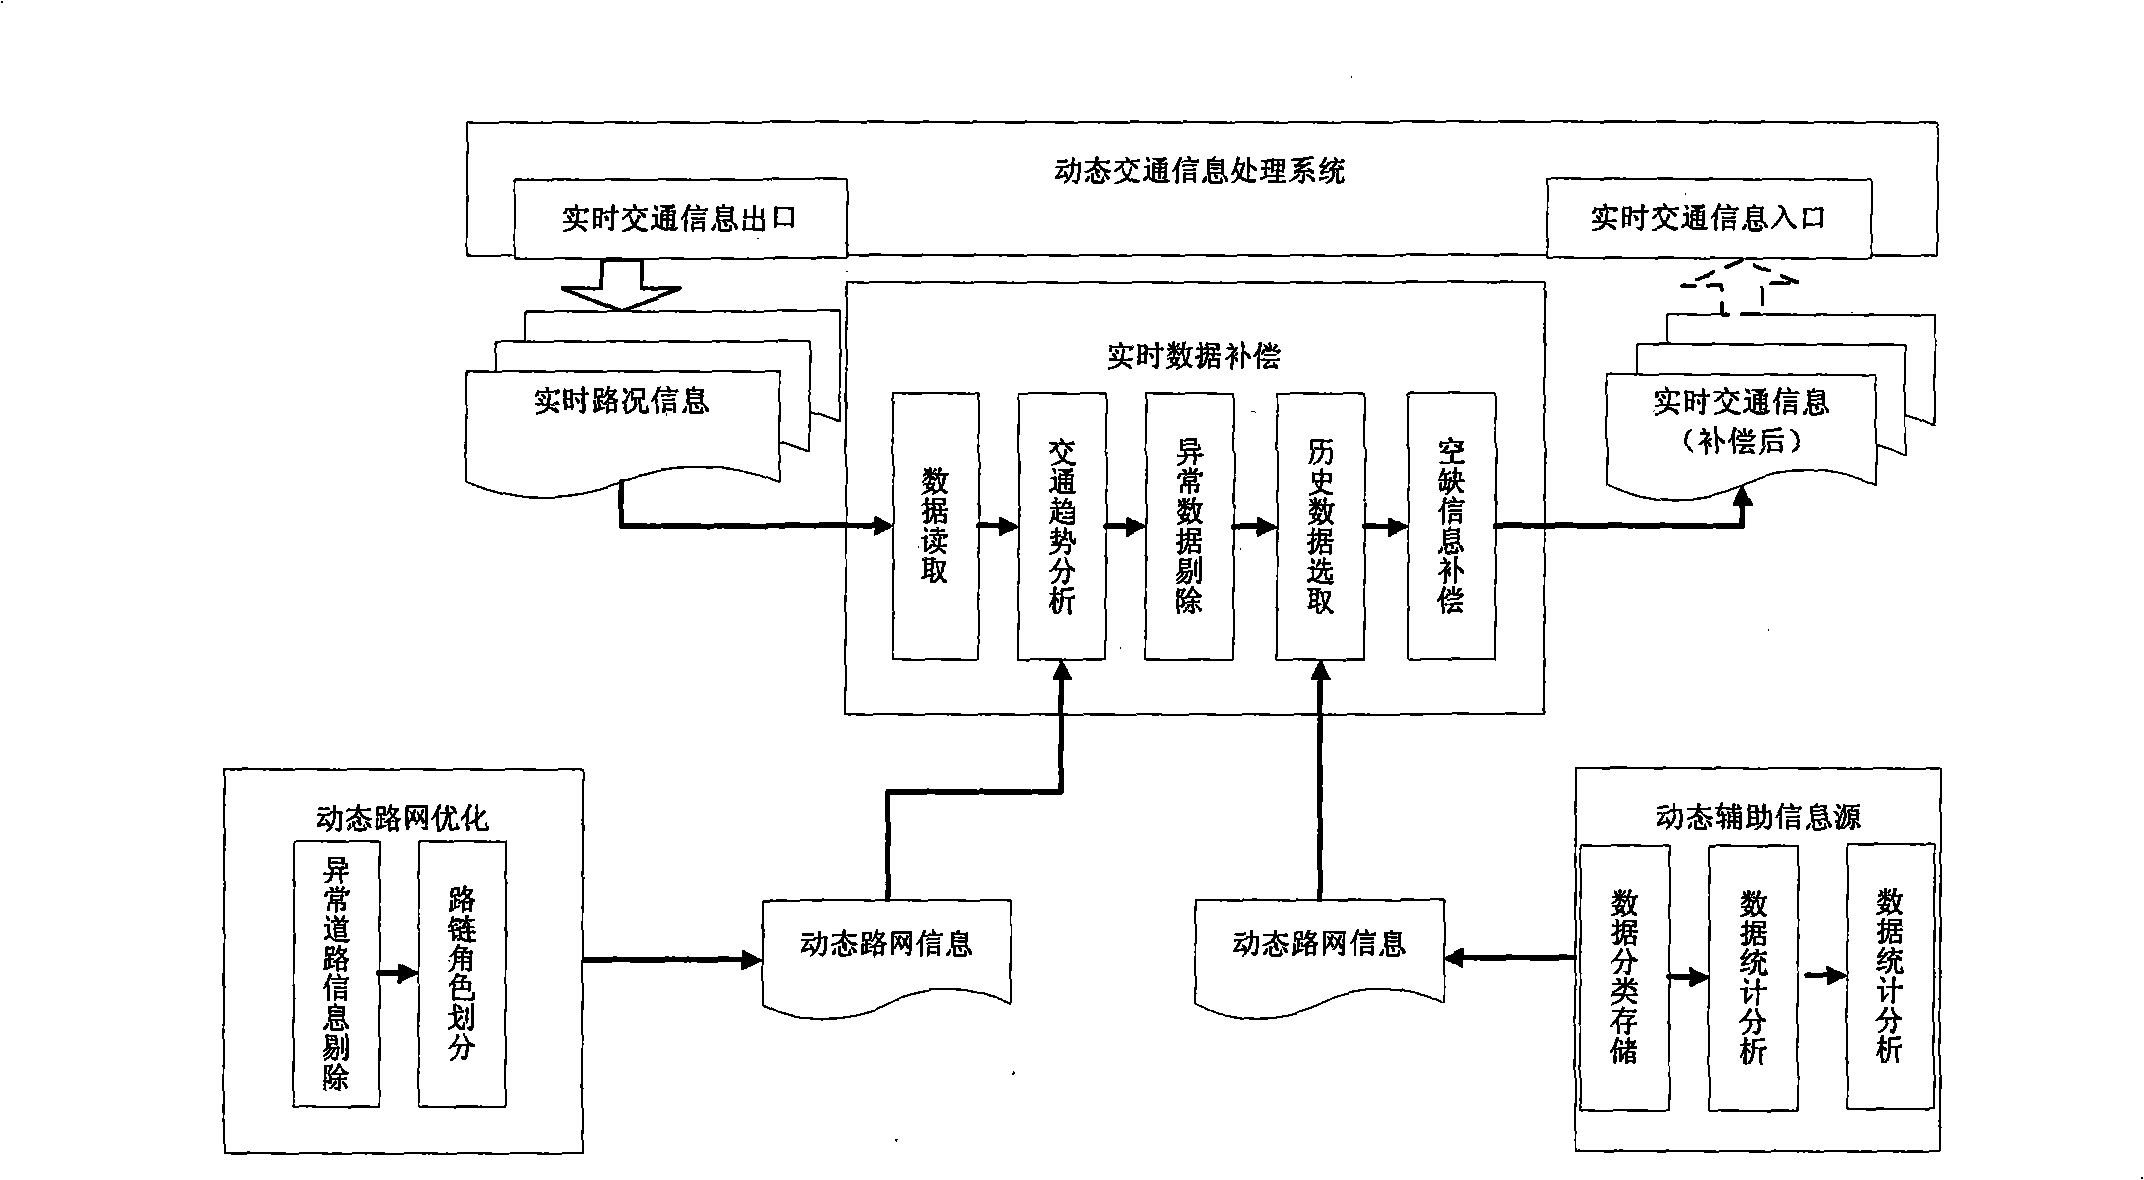 Method for compensating real time traffic information data